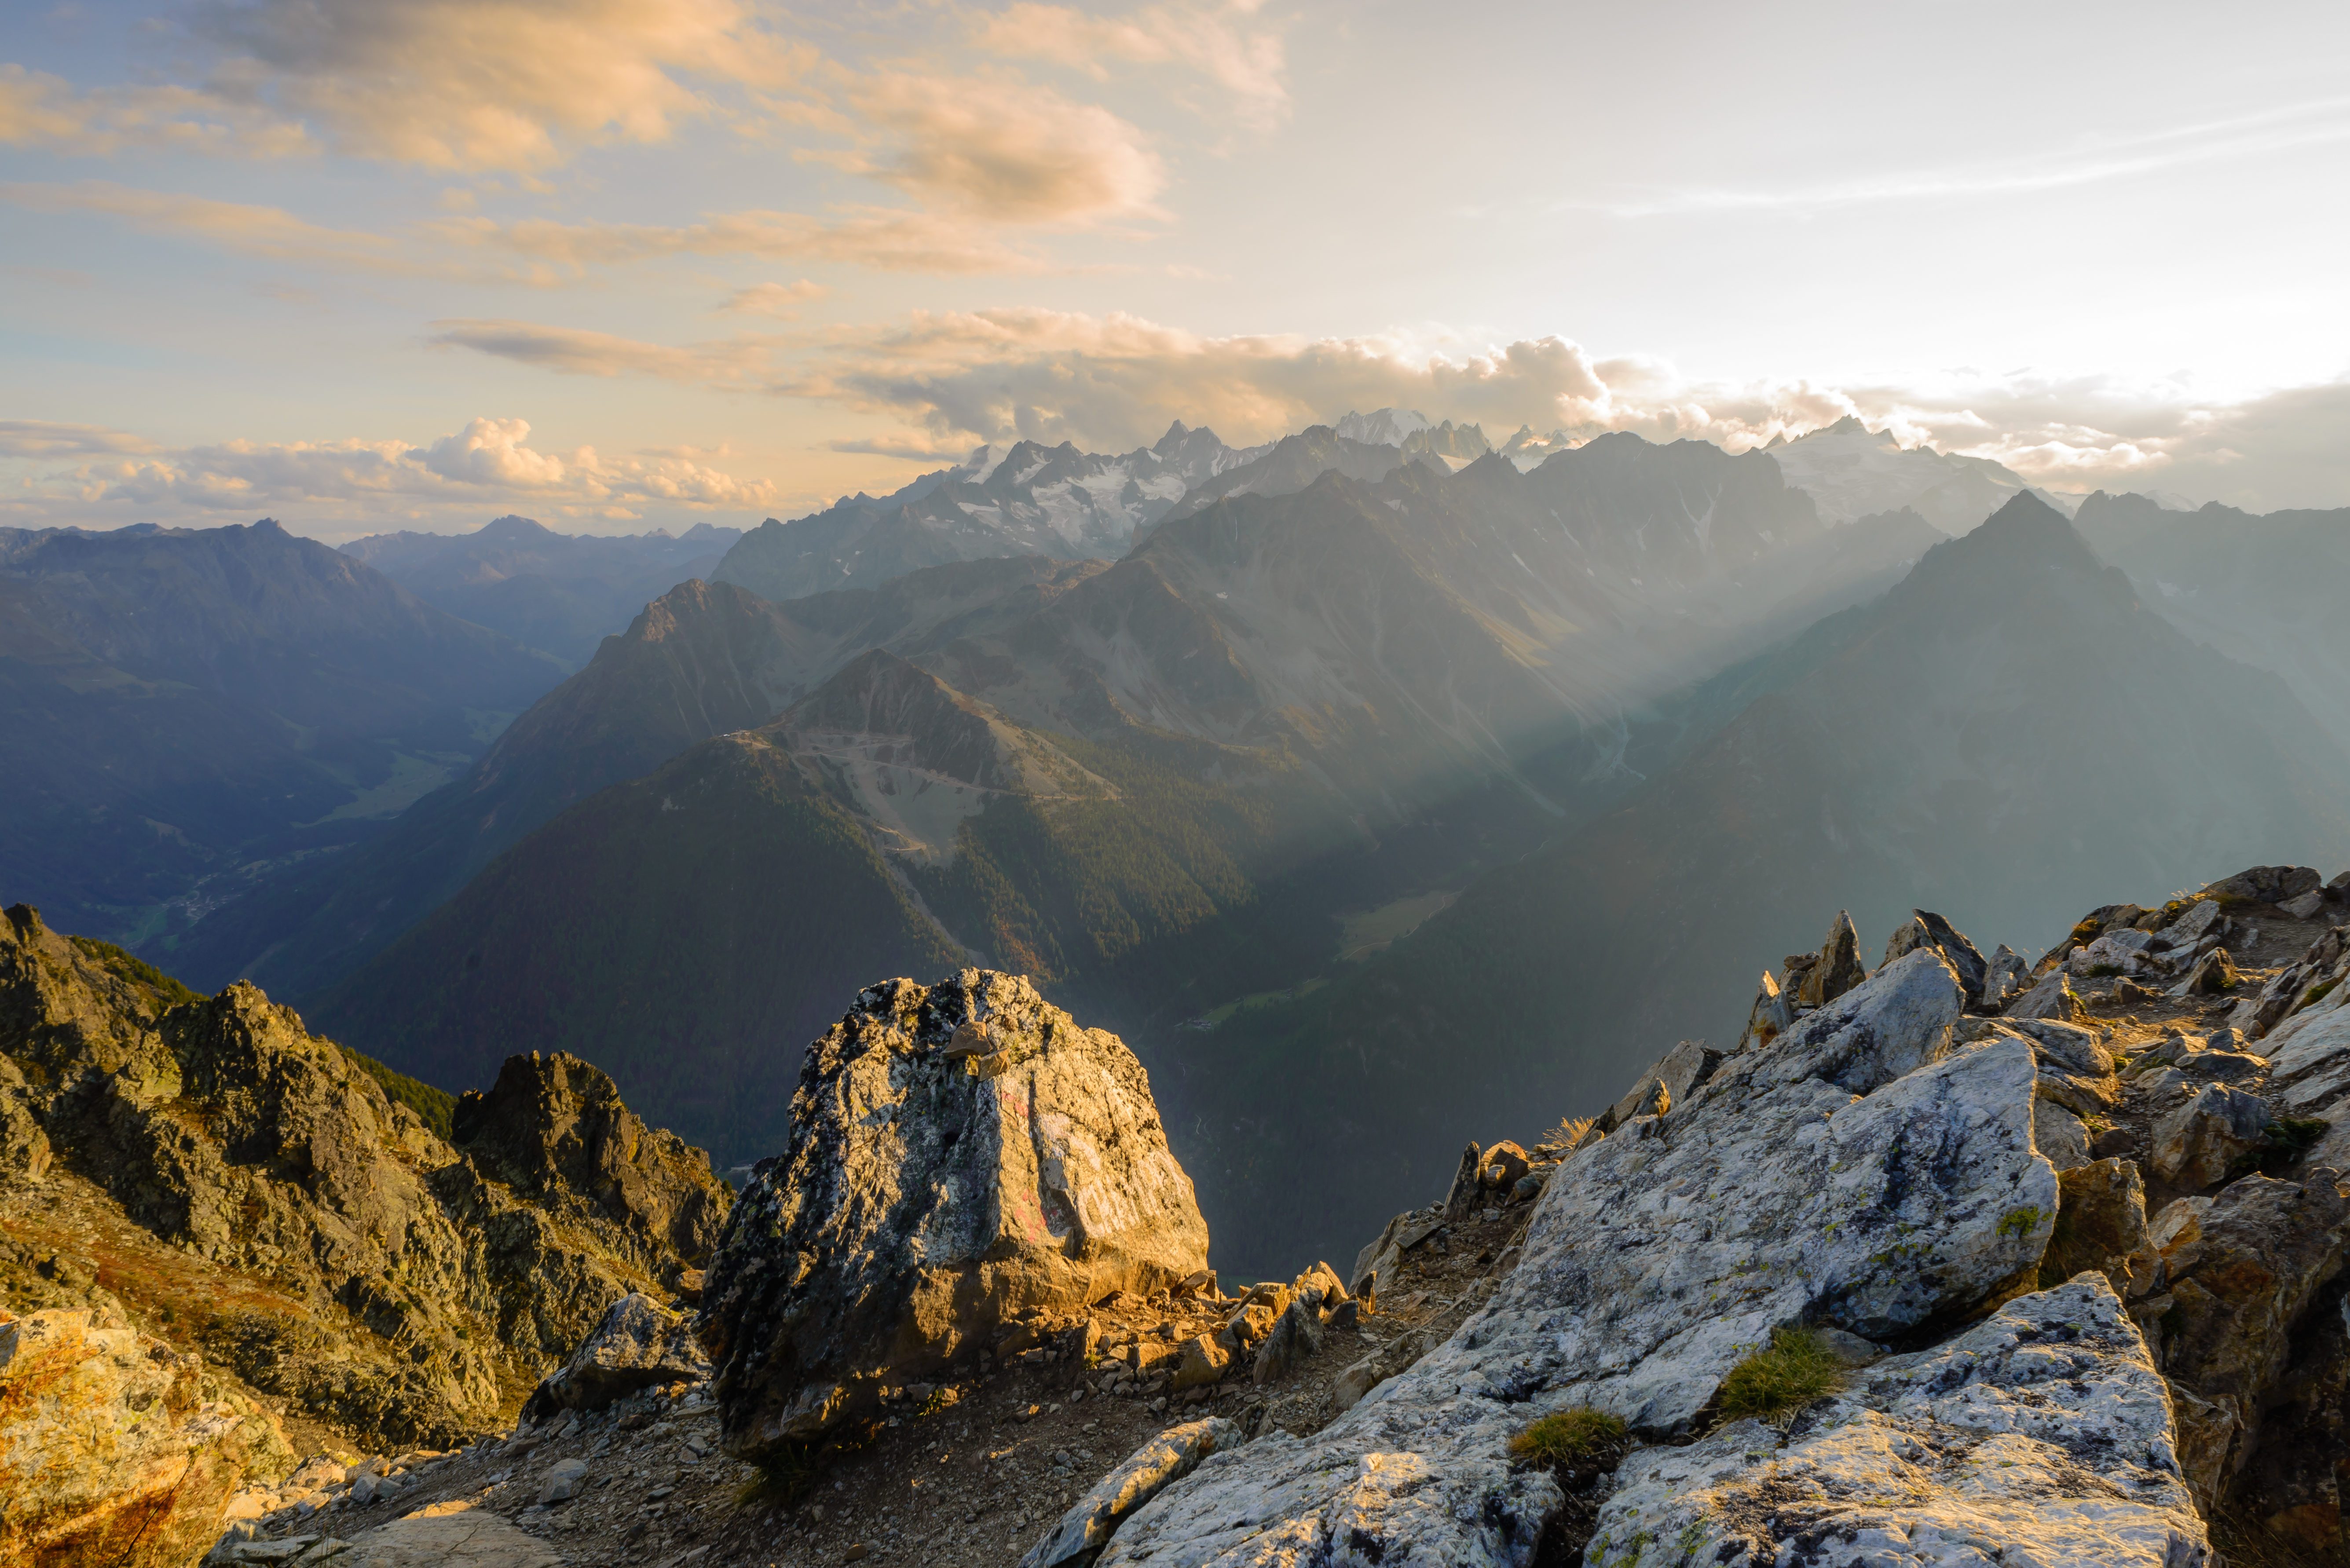 Summit sunset in the Swiss alps